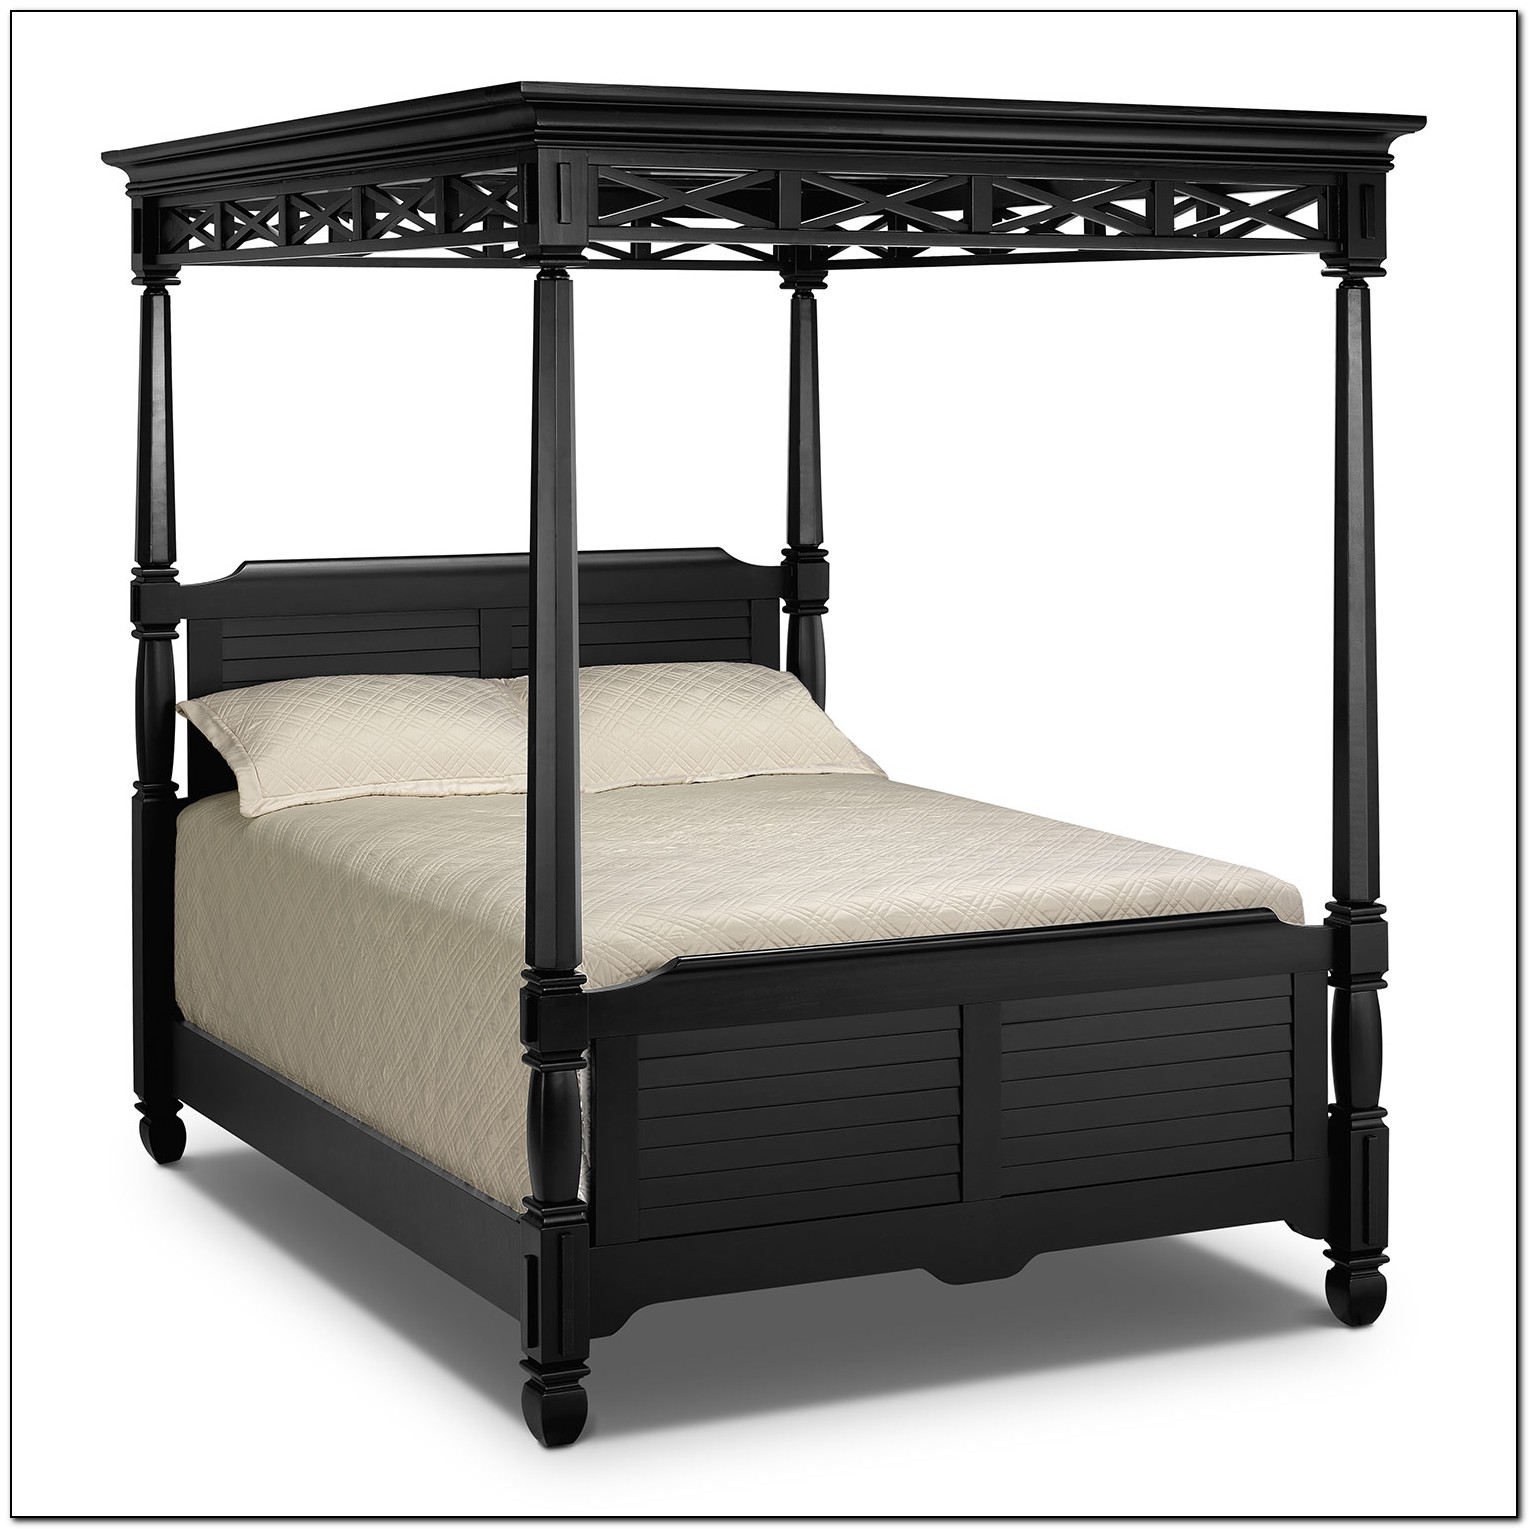 Black Canopy Bed King